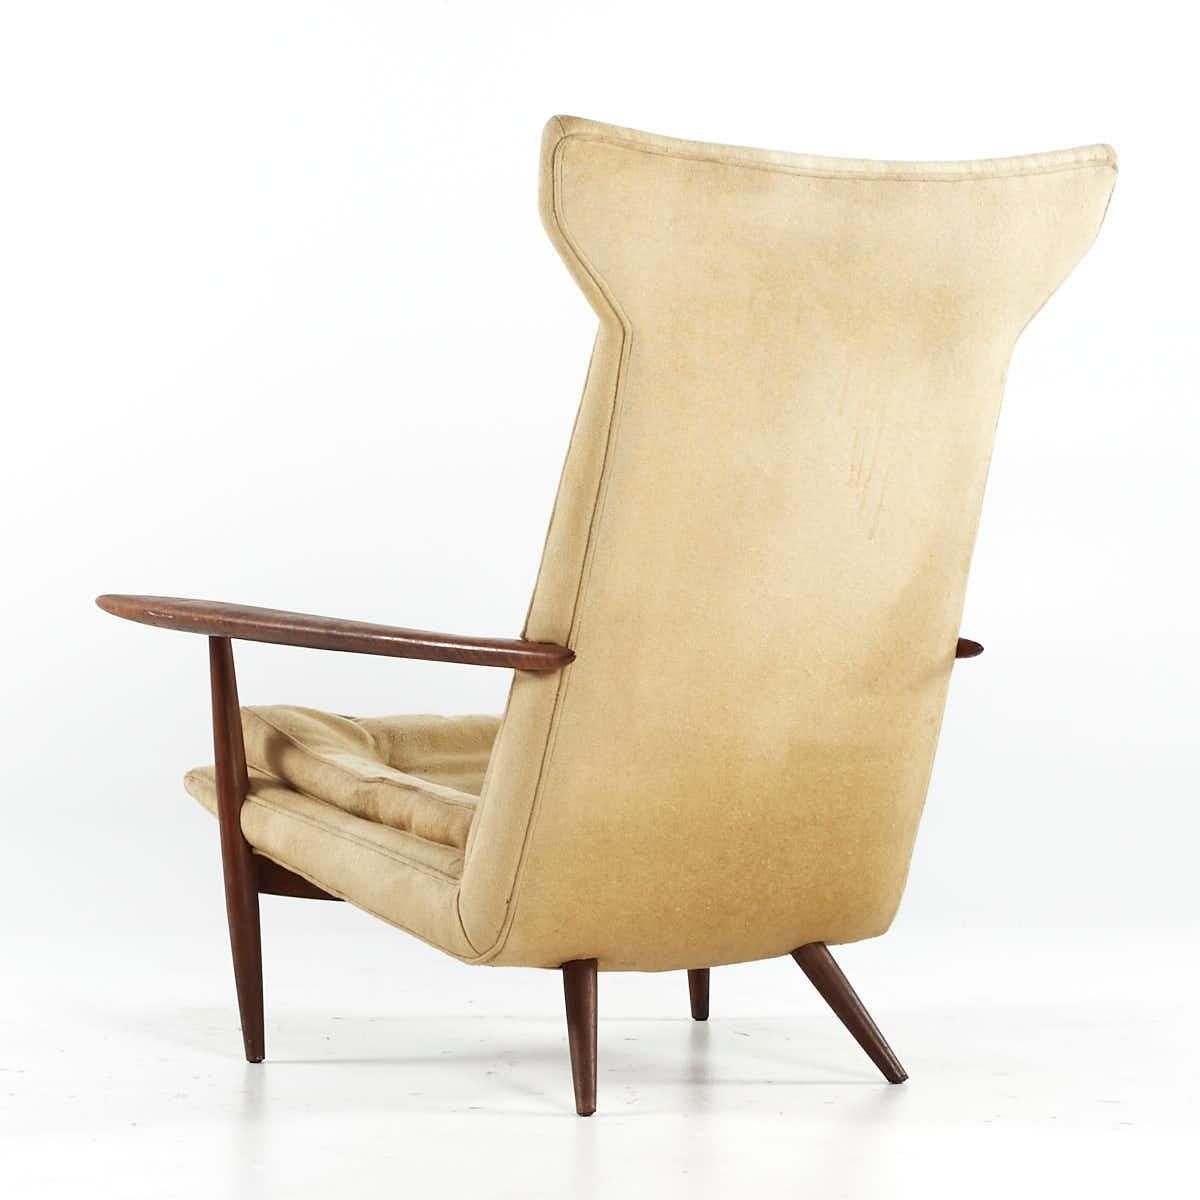 Late 20th Century George Nakashima for Widdicomb Mid Century #257 W Wing Back Lounge Chair